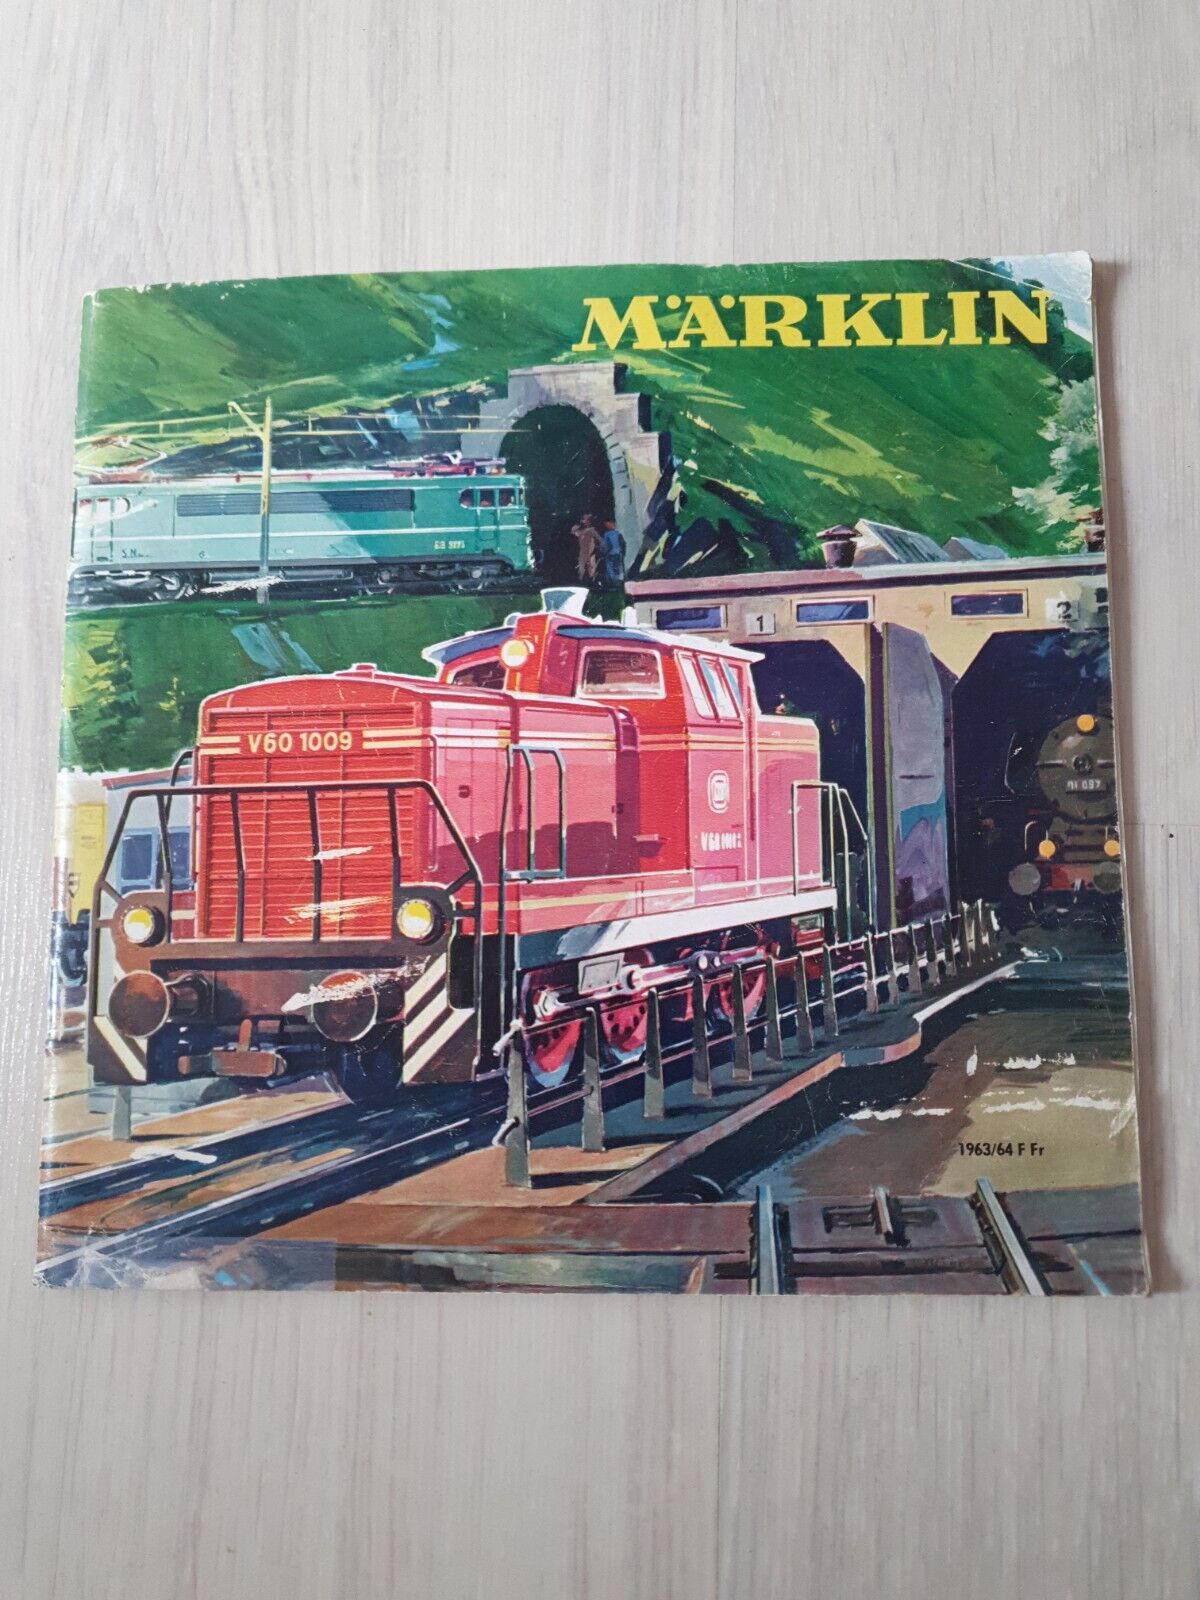 MARKLIN - GENERAL CATALOGUE - 1963 / 1964 - IN FRENCH -